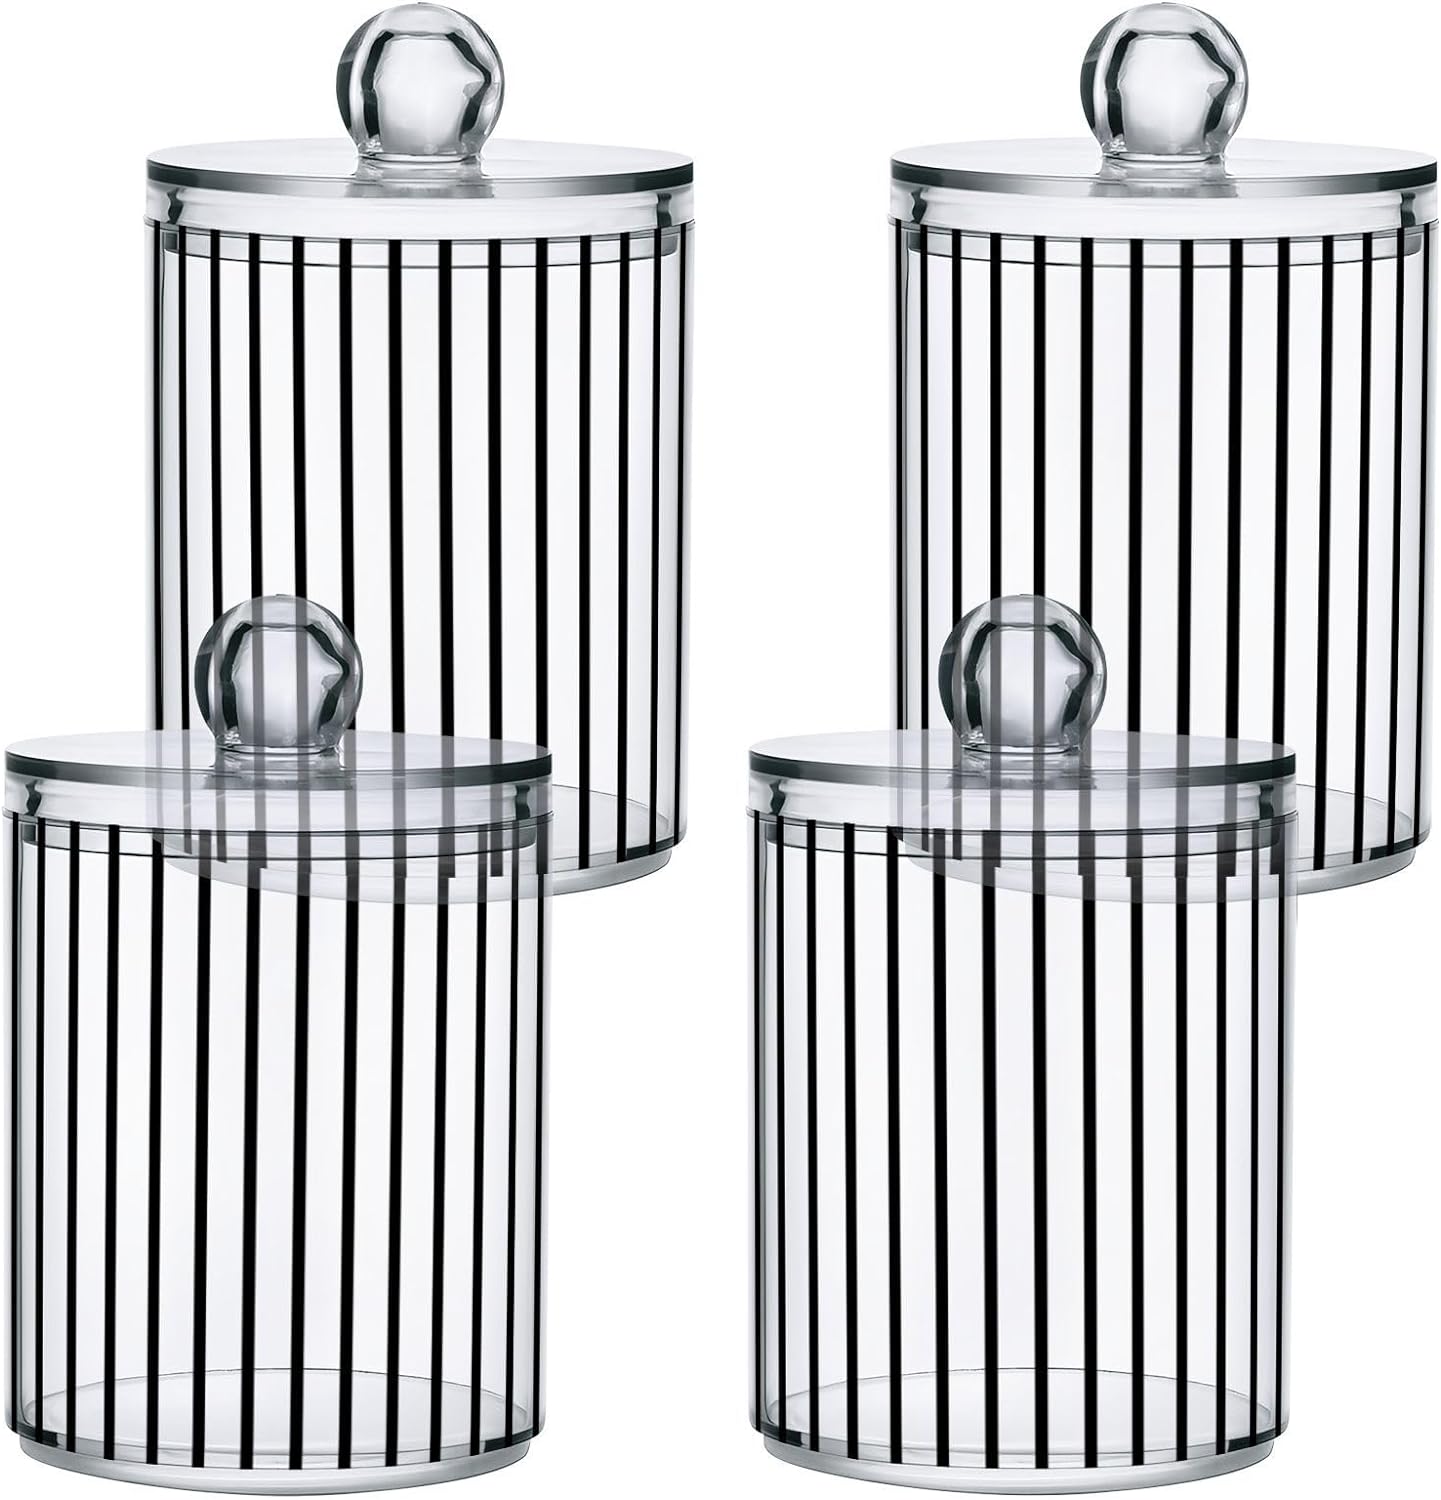 FLildon Black White Stripes Qtip Holder Dispenser, Bathroom Organizer and Storage Containers, 4Pack Clear Plastic Apothecary Jars with Lids for Cotton Ball, Cotton Swab, Floss